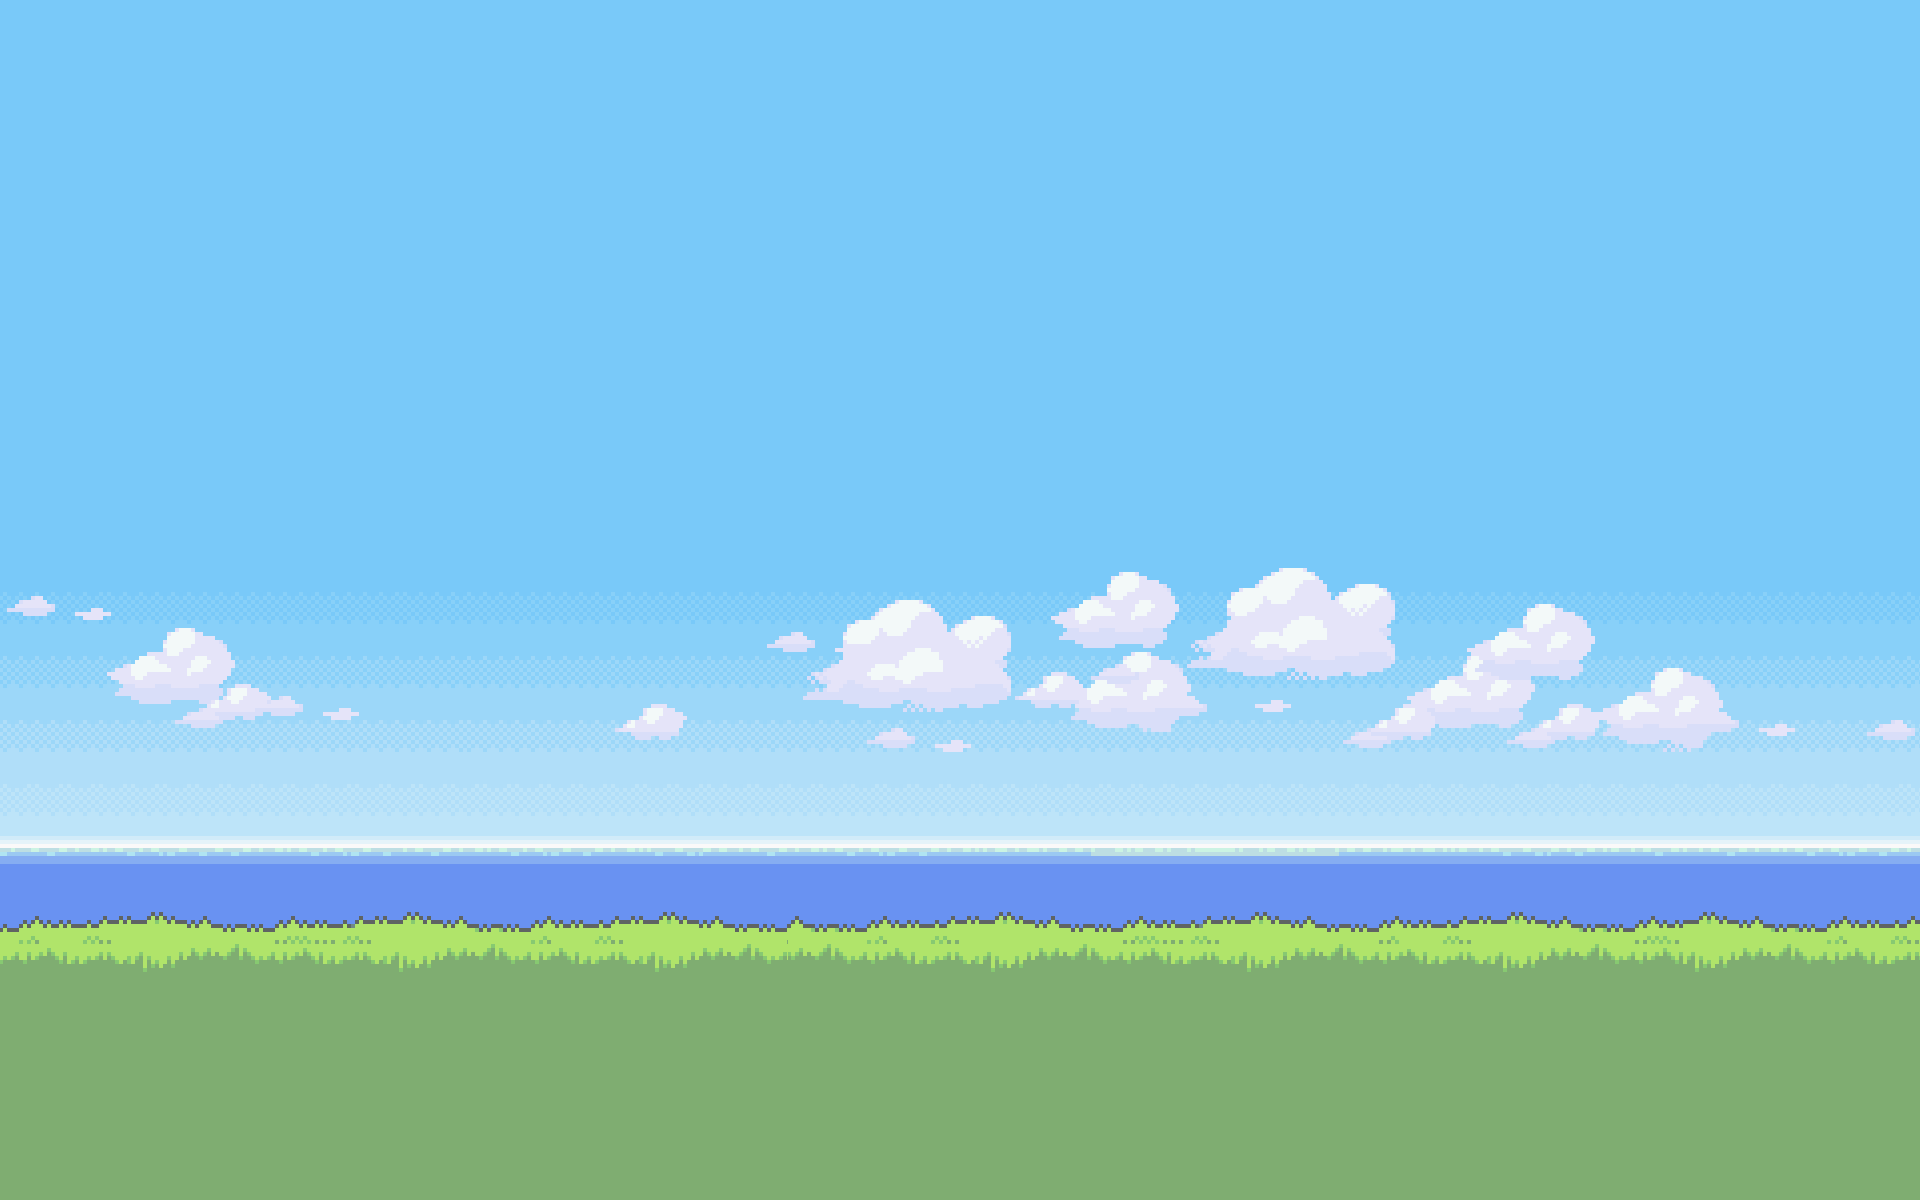 Pokemon Clouds Pixel Art For Your